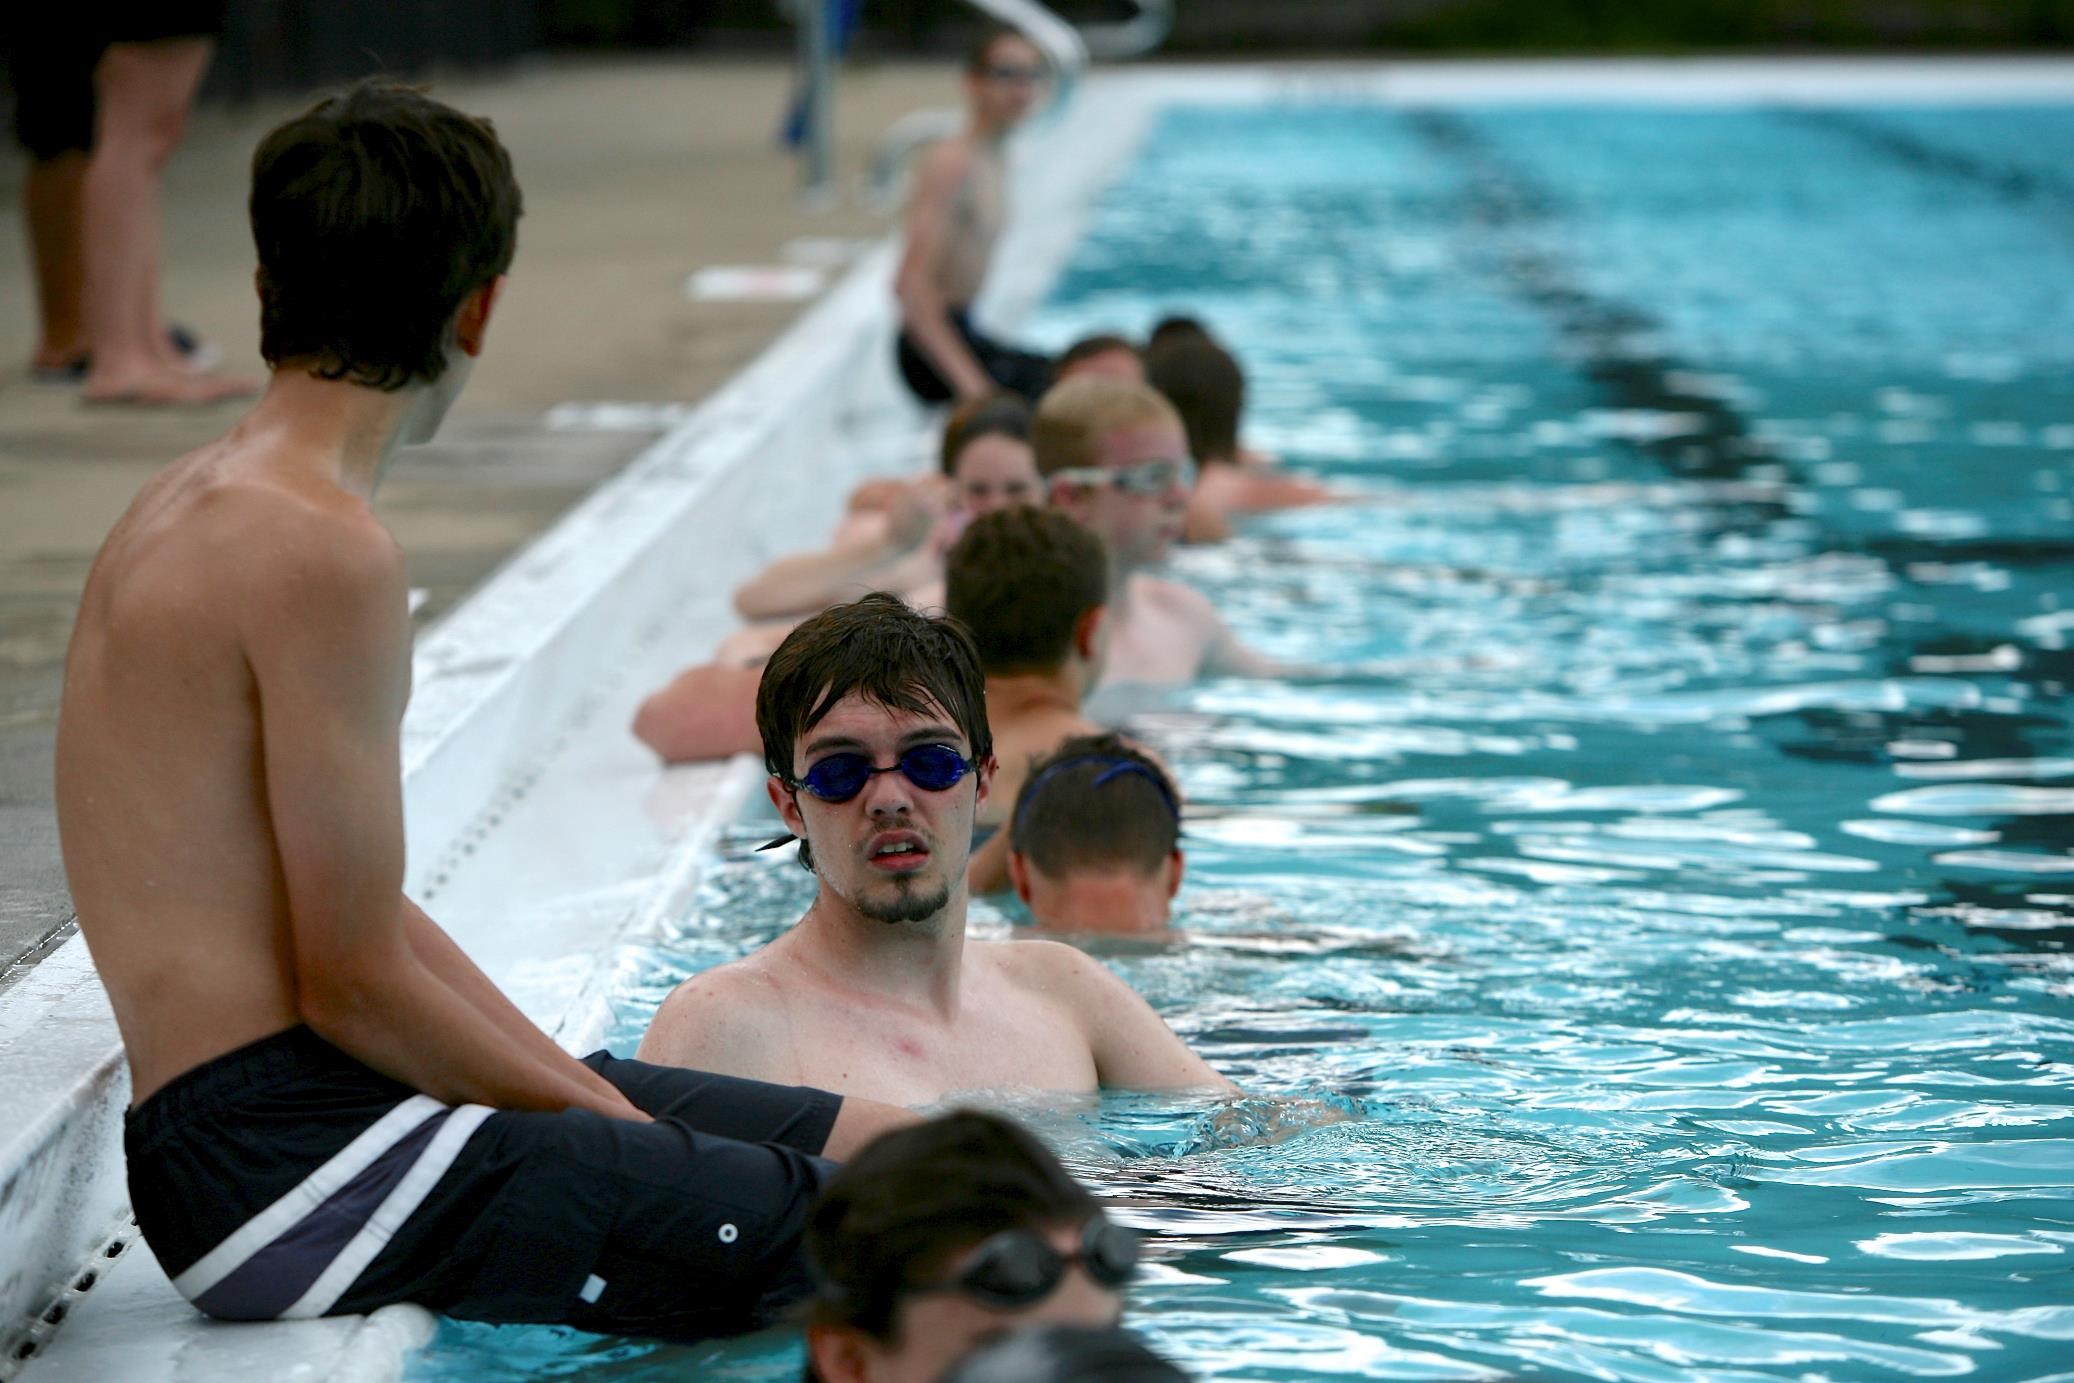 Teens line the side of a pool in the water, wearing goggles, training to be lifeguards.